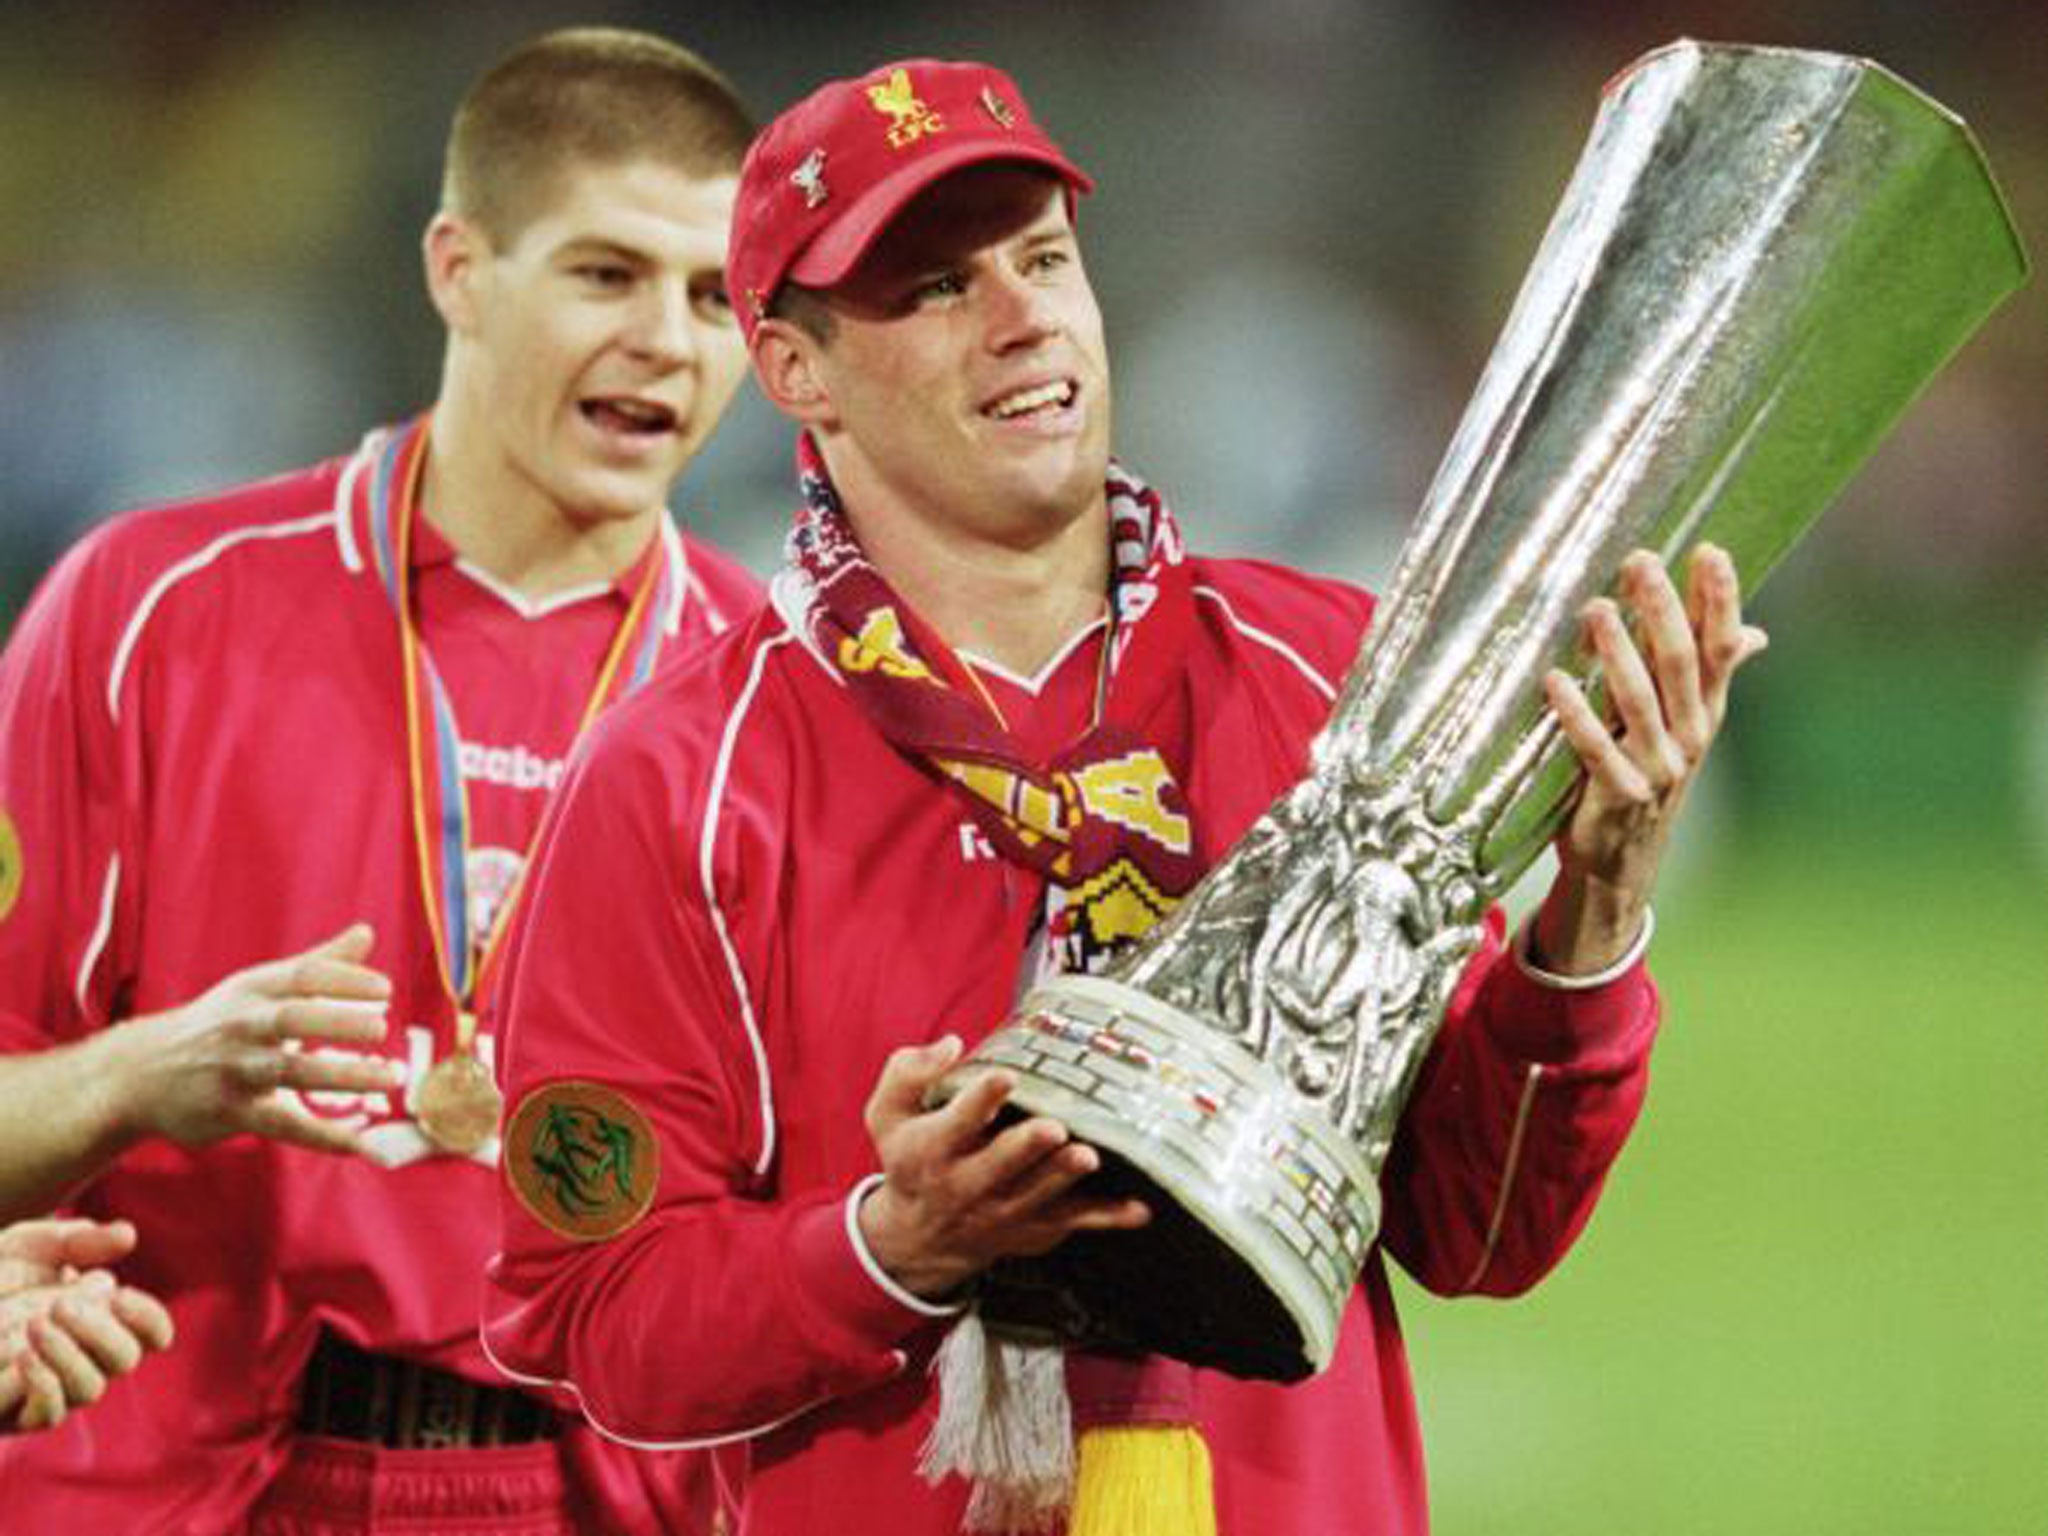 Liverpool’s Jamie Carragher, with Steven Gerrard in the background, after winning the Uefa Cup in 2001